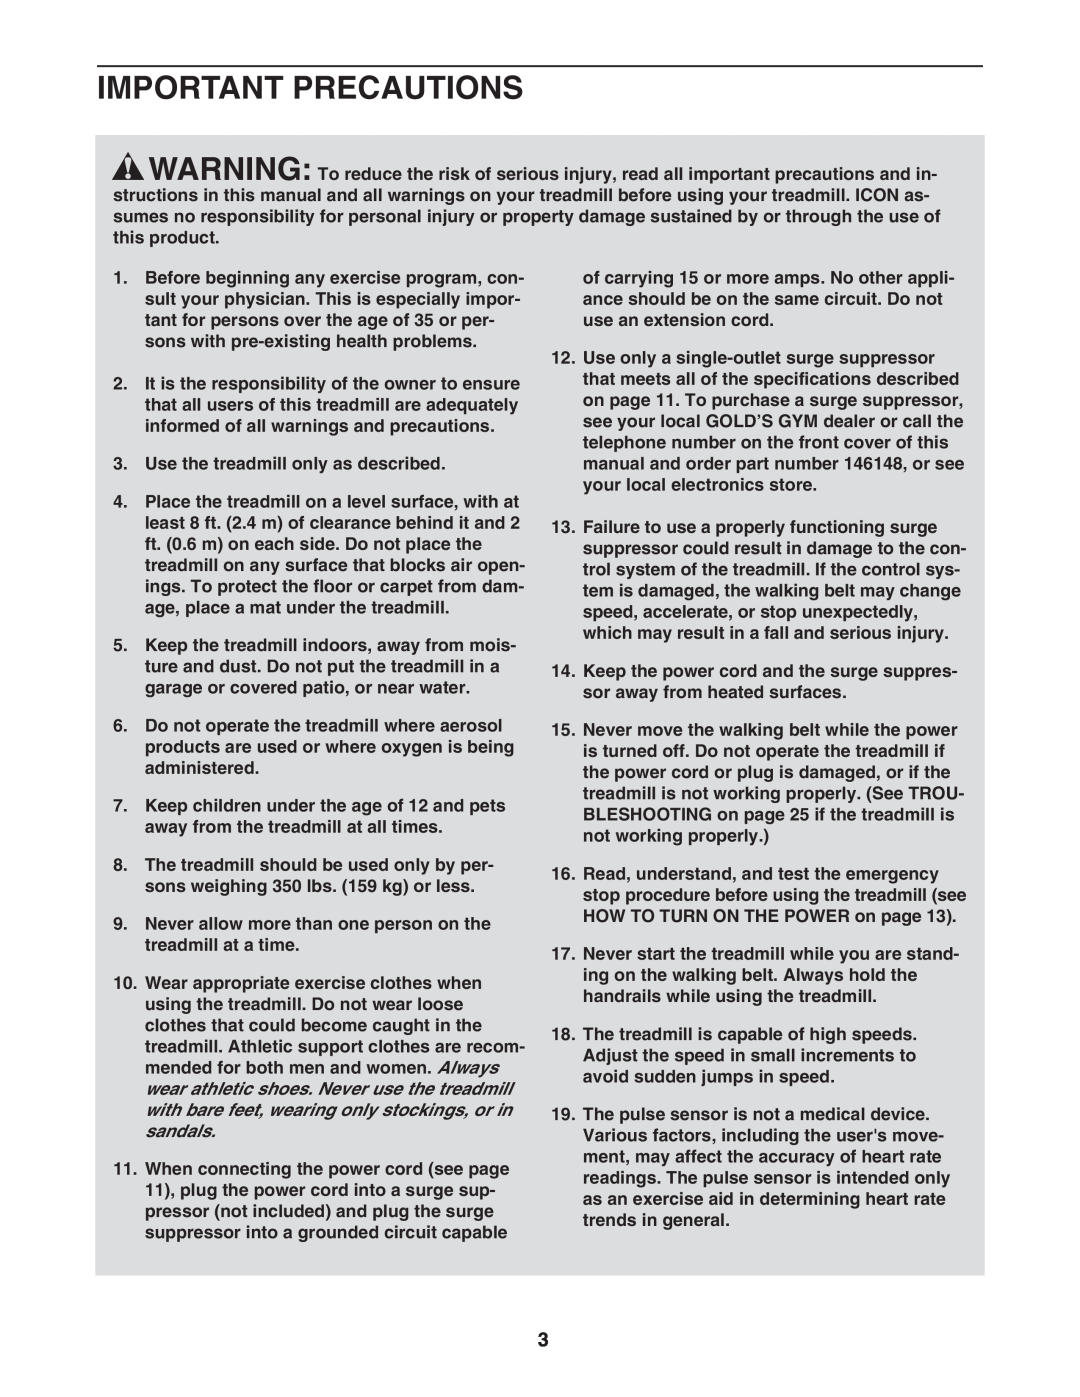 Gold's Gym CWTL05607 manual Important Precautions, Use the treadmill only as described 